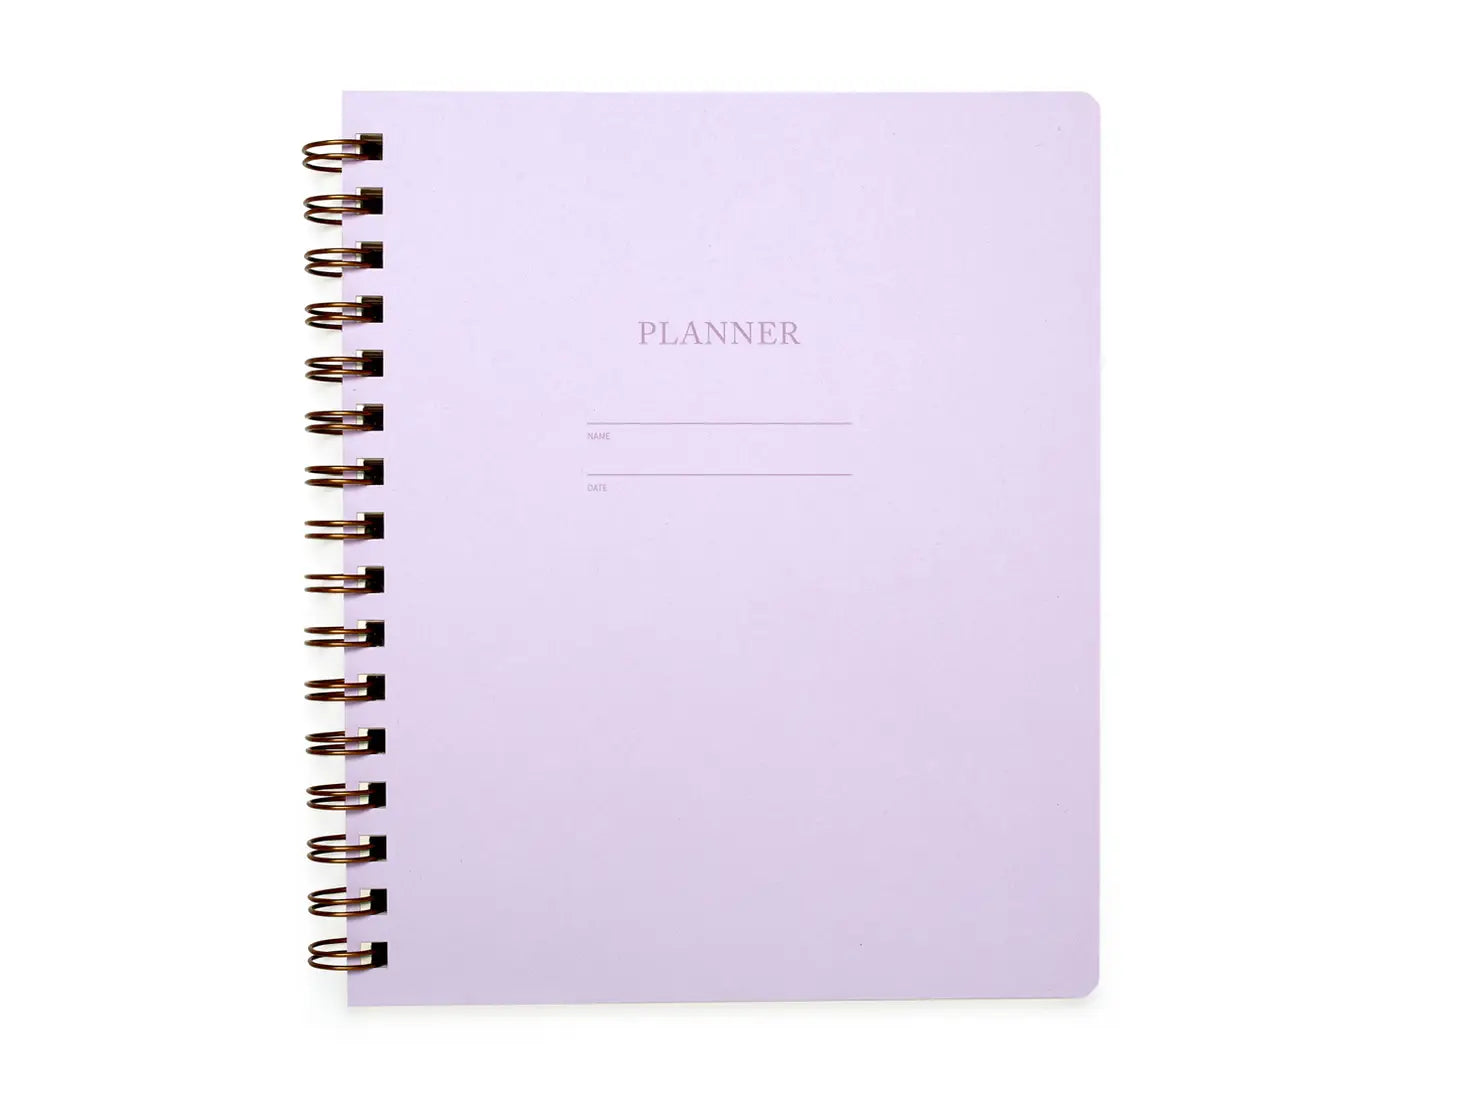 Lilac planner cover. "Planner" is letterpress printed into the cover.